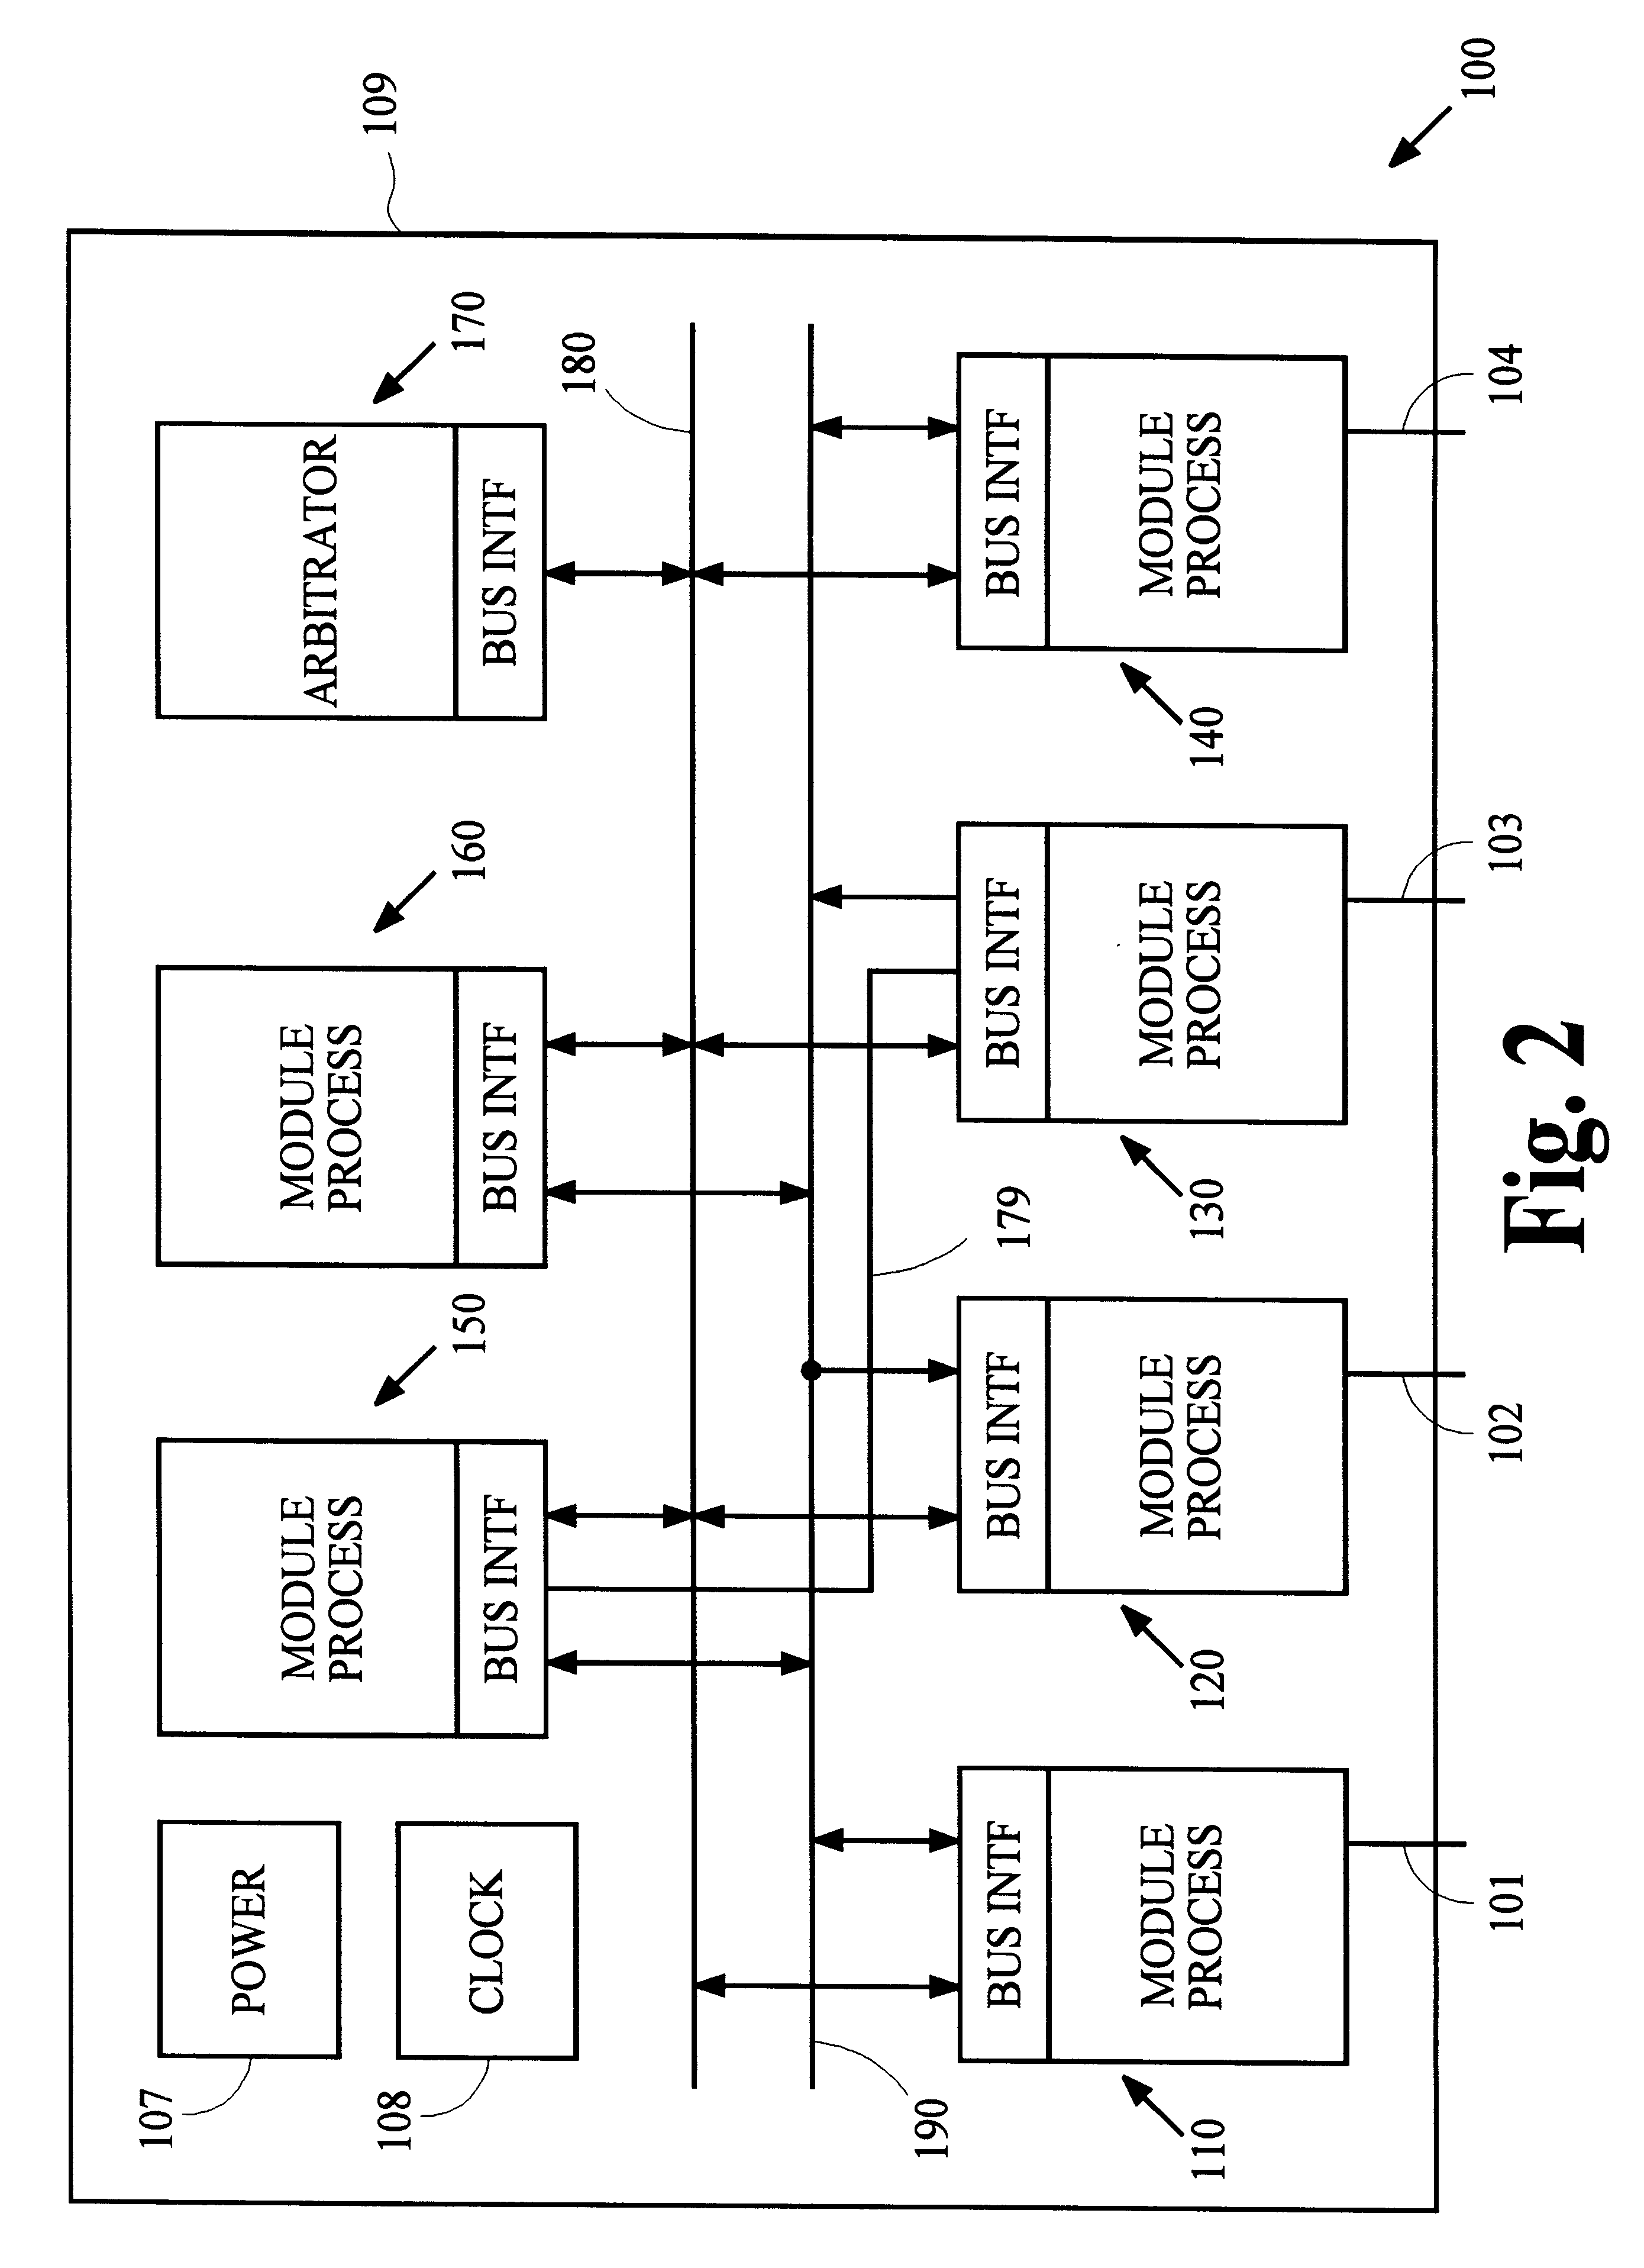 Reusable modules for complex integrated circuit devices